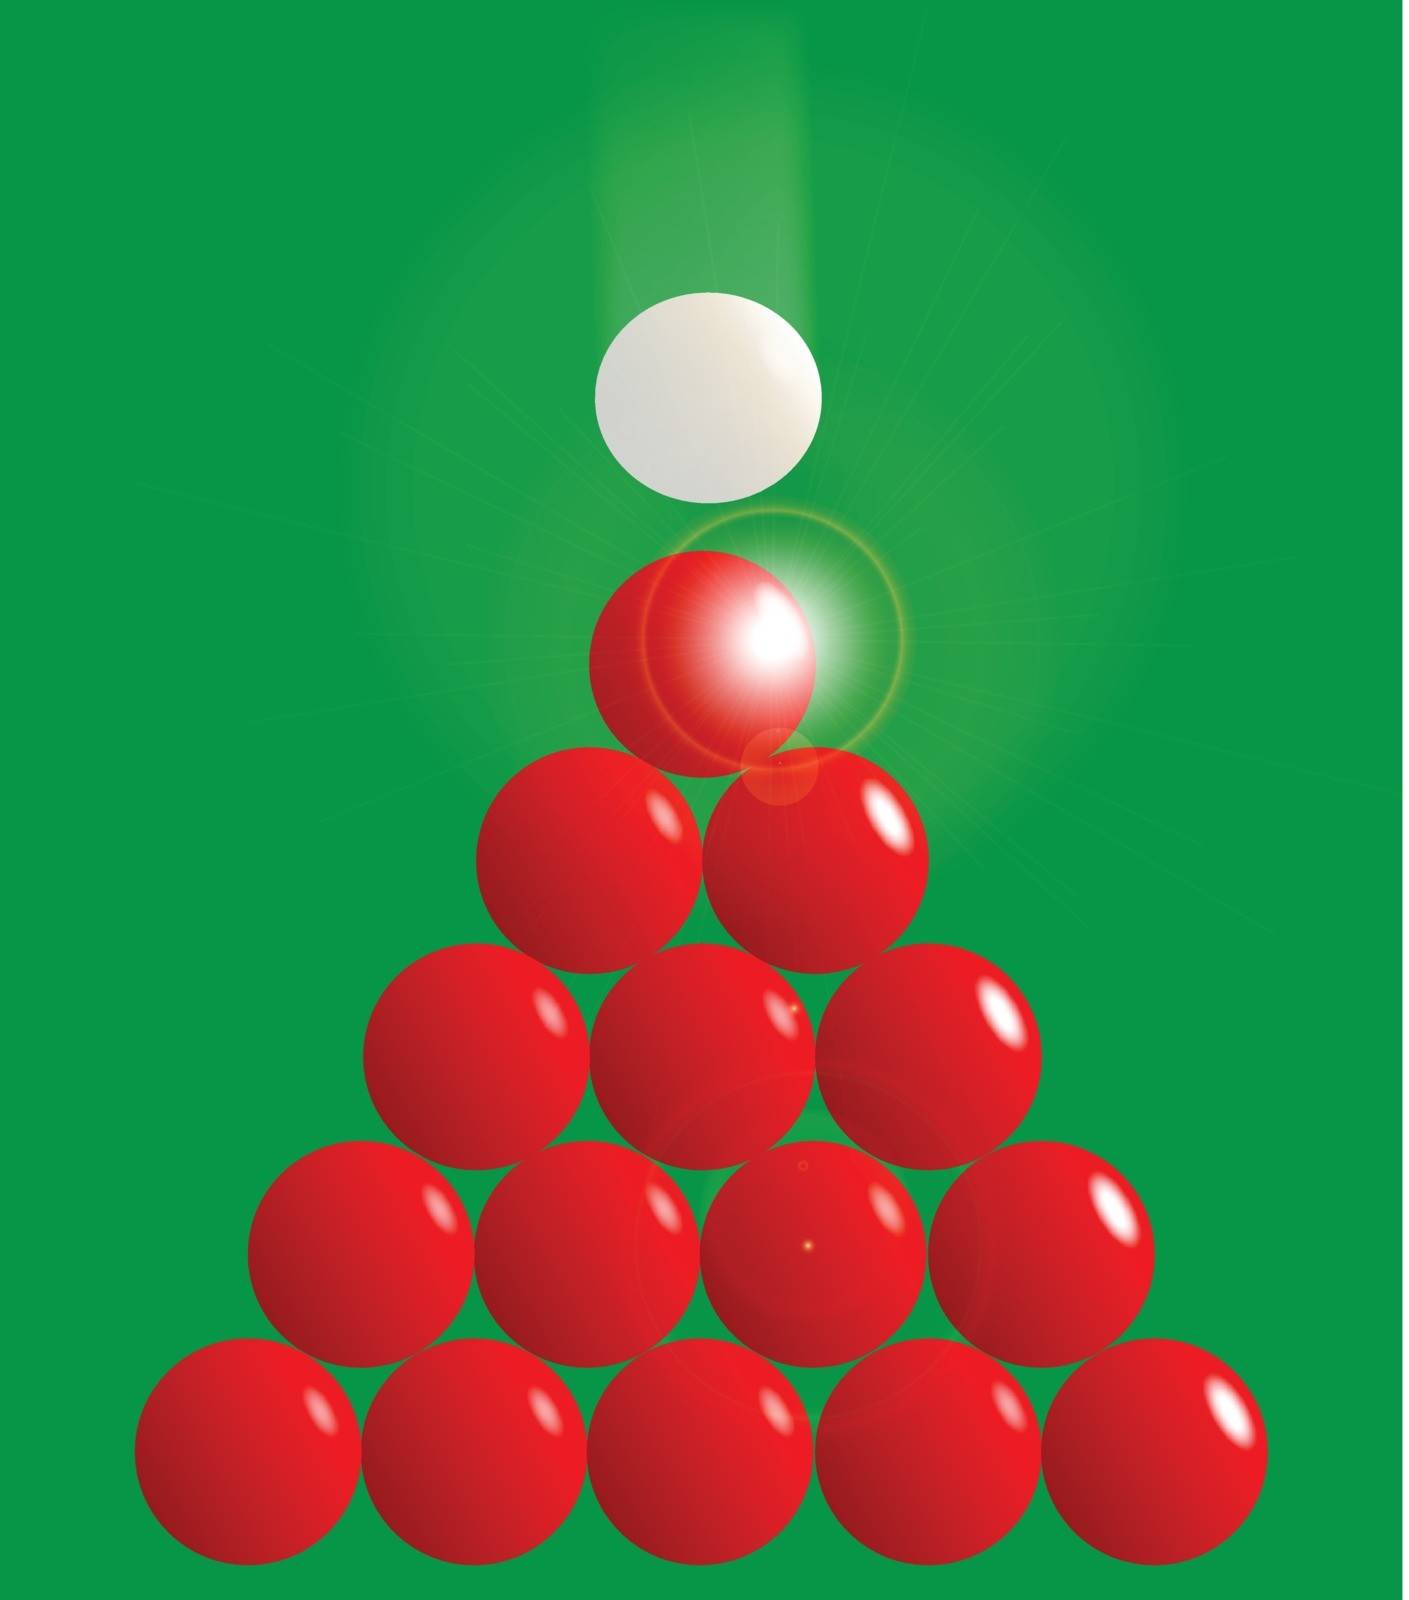 A white billiard ball about to break the reds.